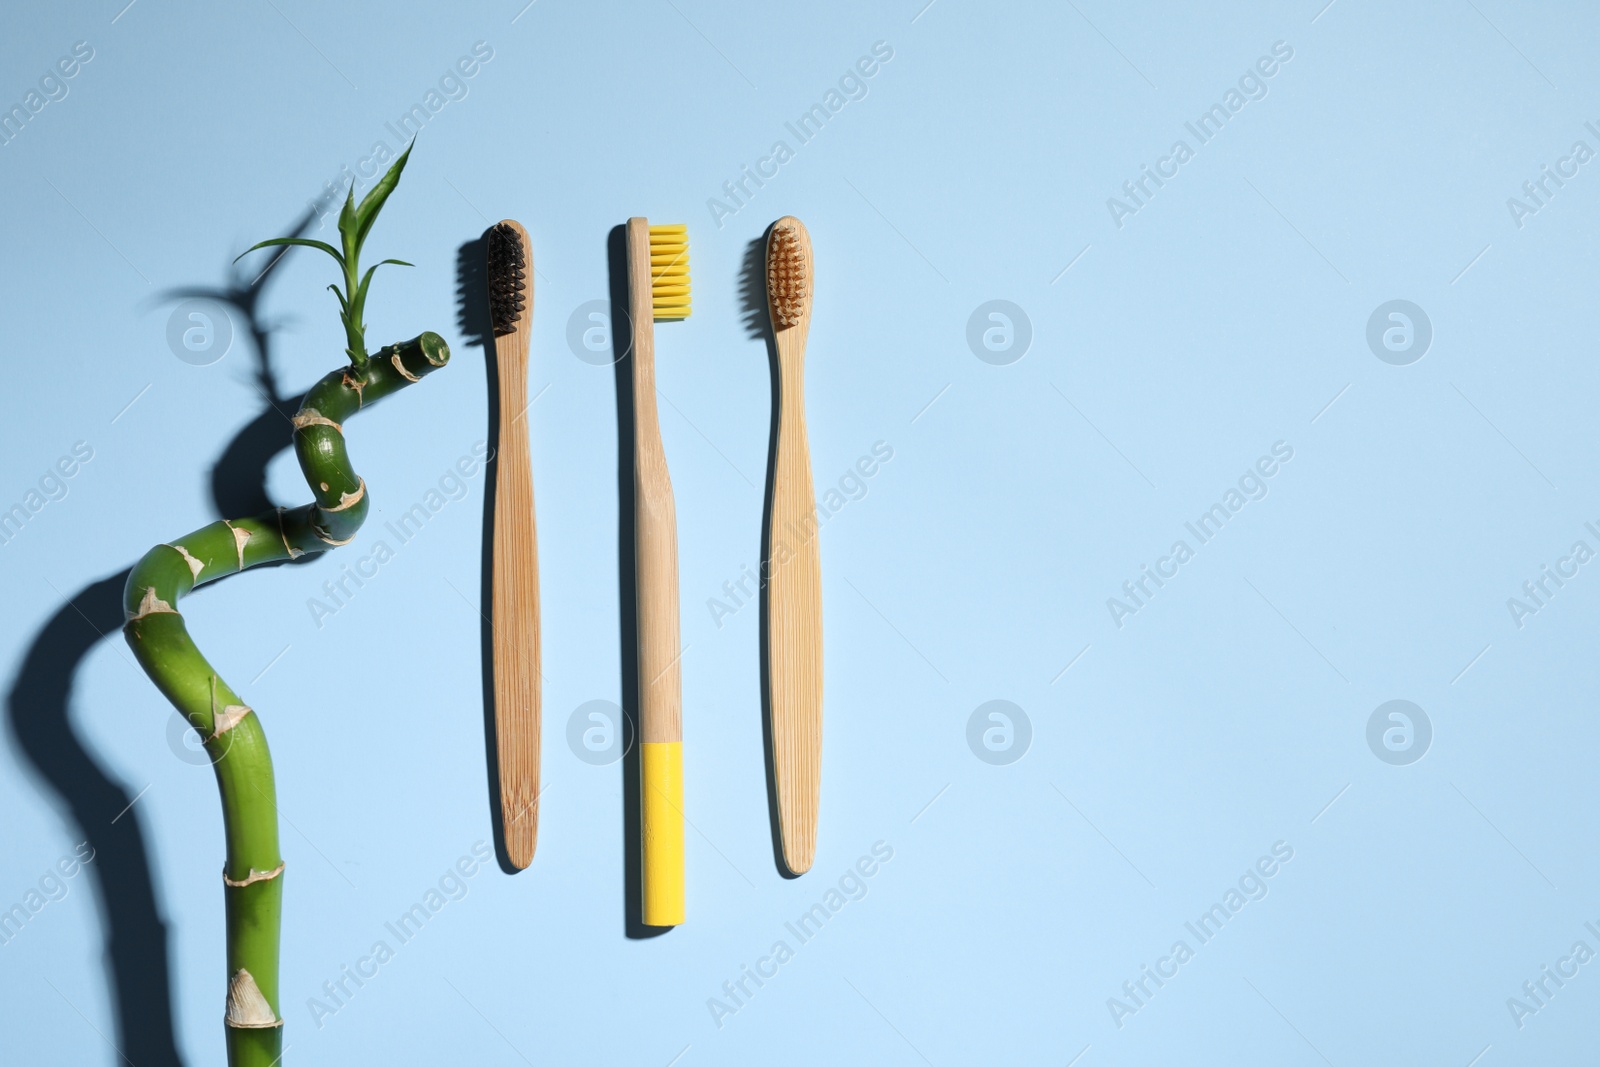 Photo of Wooden toothbrushes and bamboo on light blue background, flat lay. Space for text